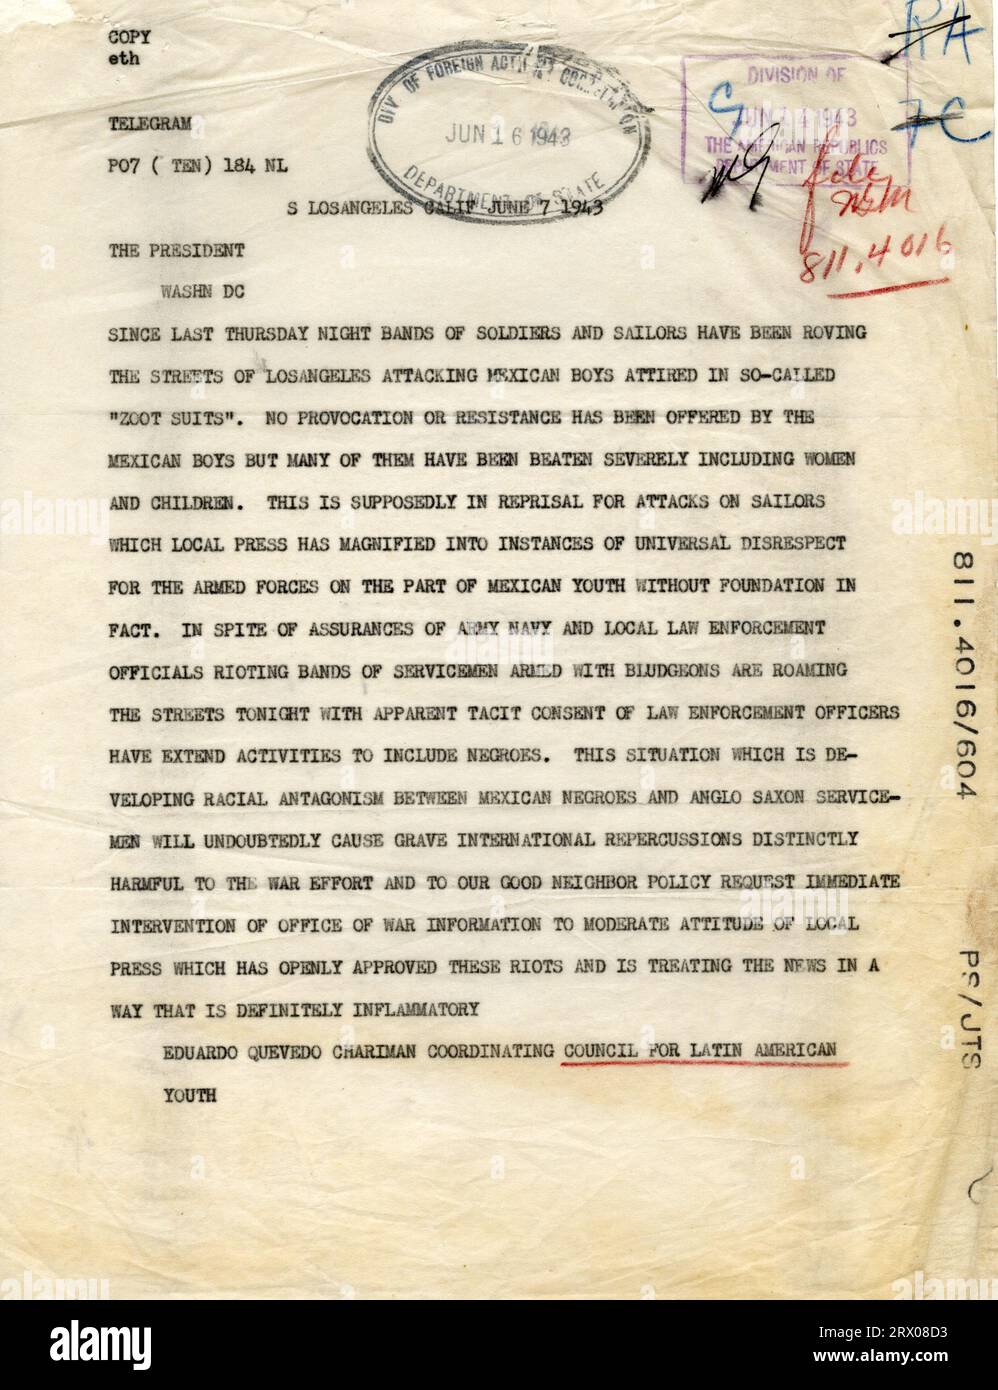 The Council for Latin American Youth sent this telegram to President Franklin Roosevelt urging his attention to the Zoot Suit riots in Los Angeles, 1943 Stock Photo